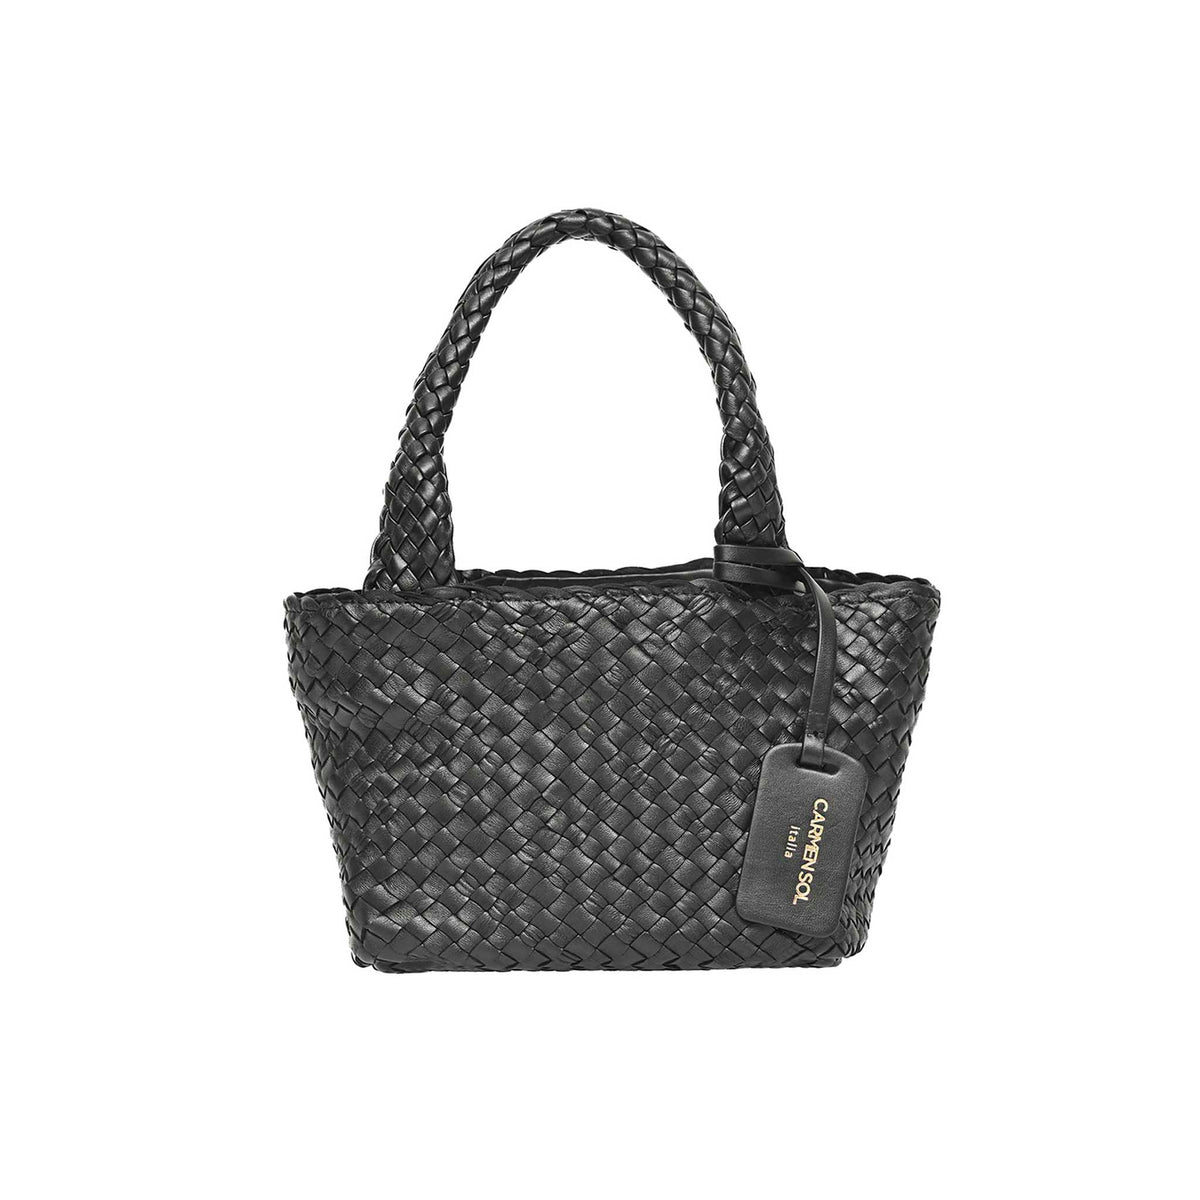 Black metallic small tote bag from mini Carmen Sol made in Italy. Best small leather bag.